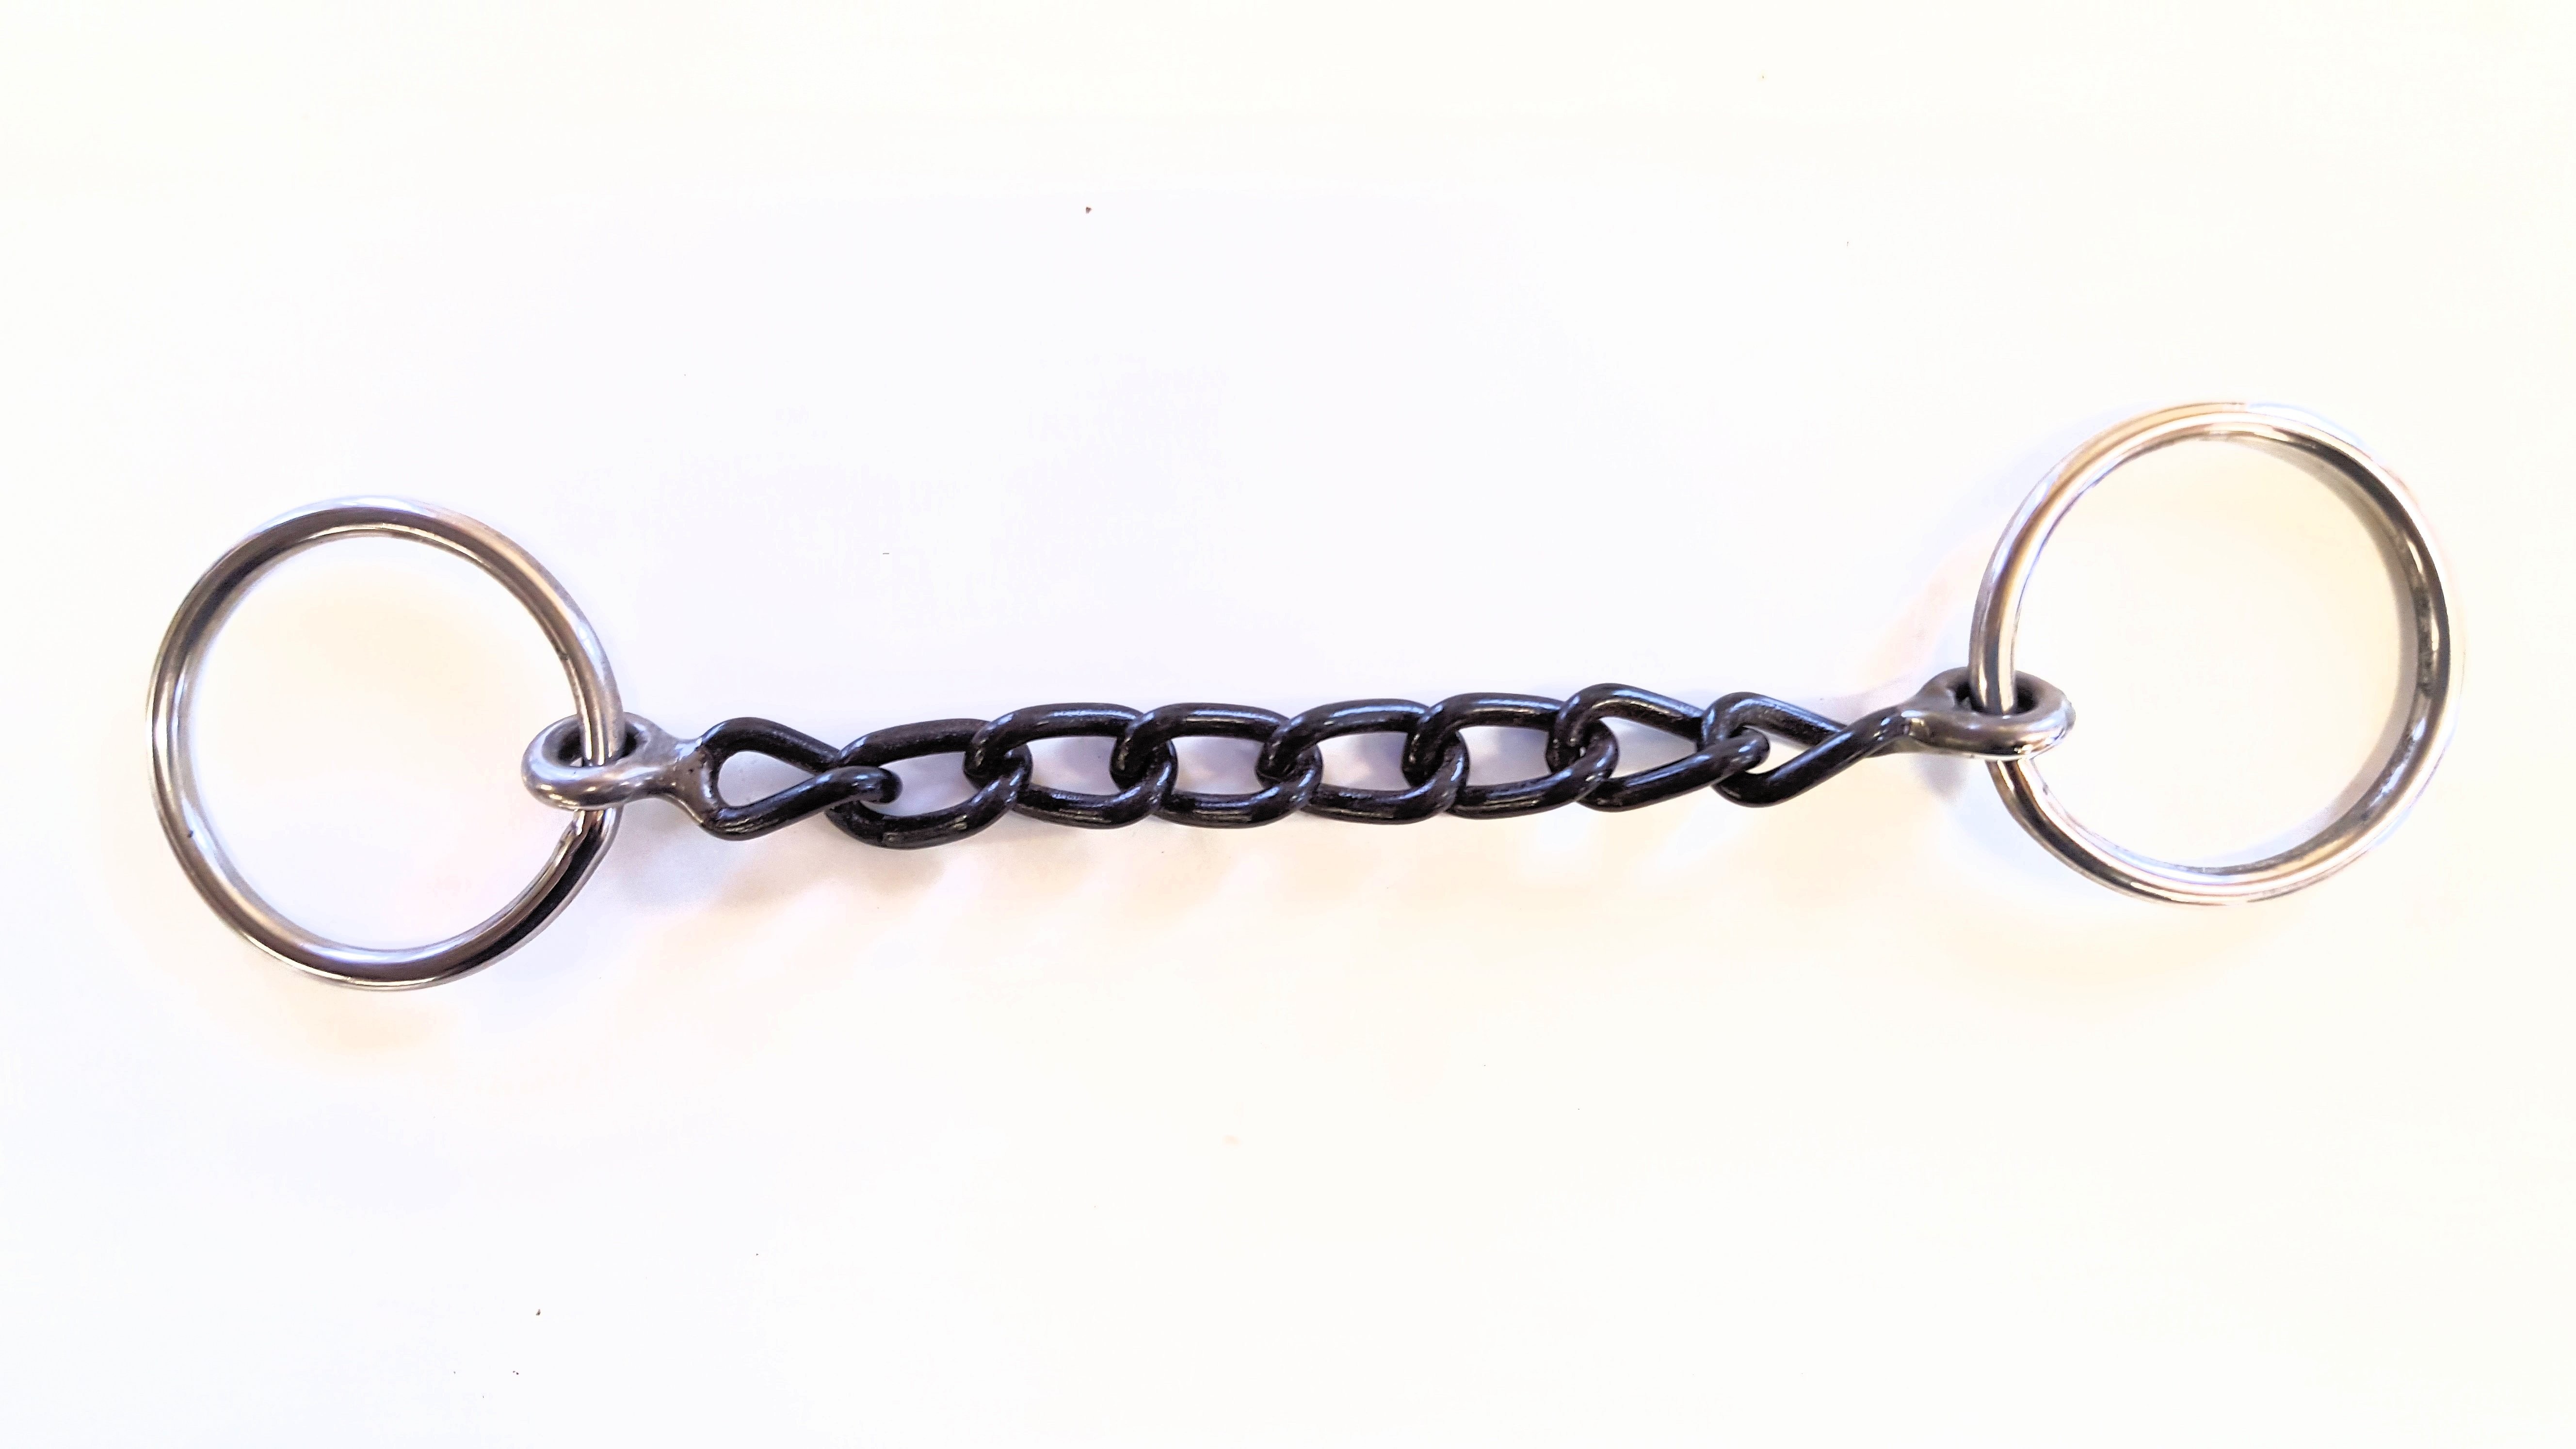 5/8" Chain mouthpiece with 2" rings